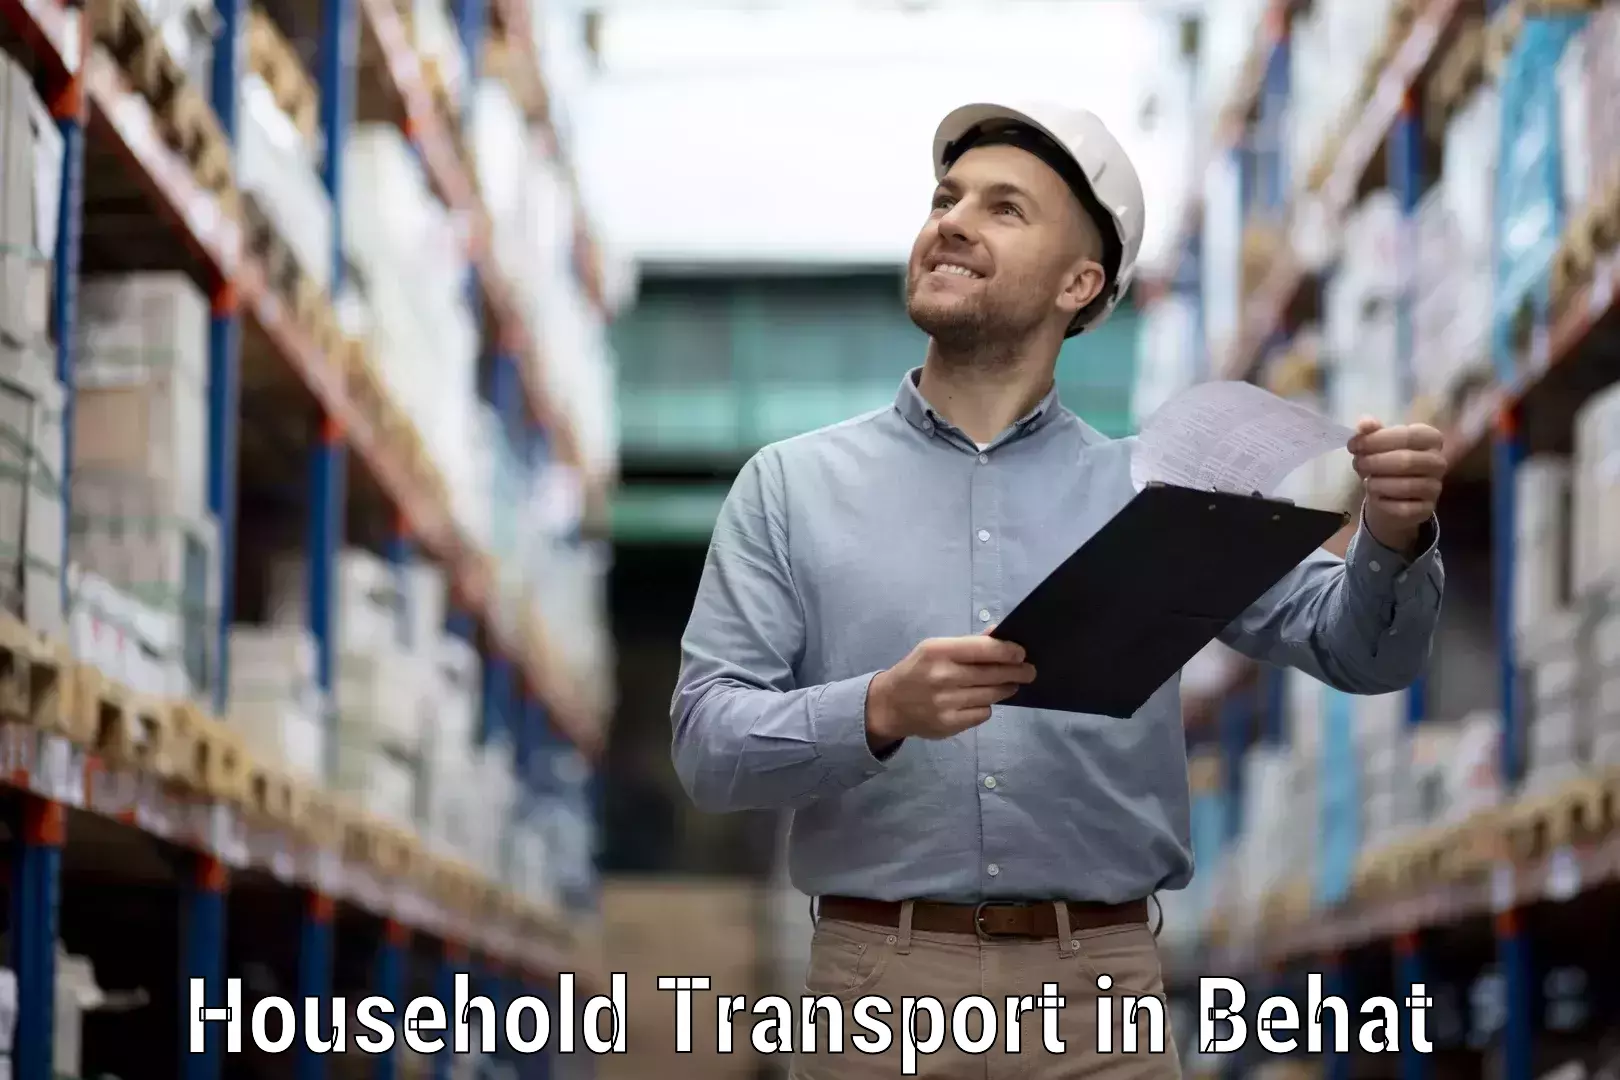 Quality relocation assistance in Behat